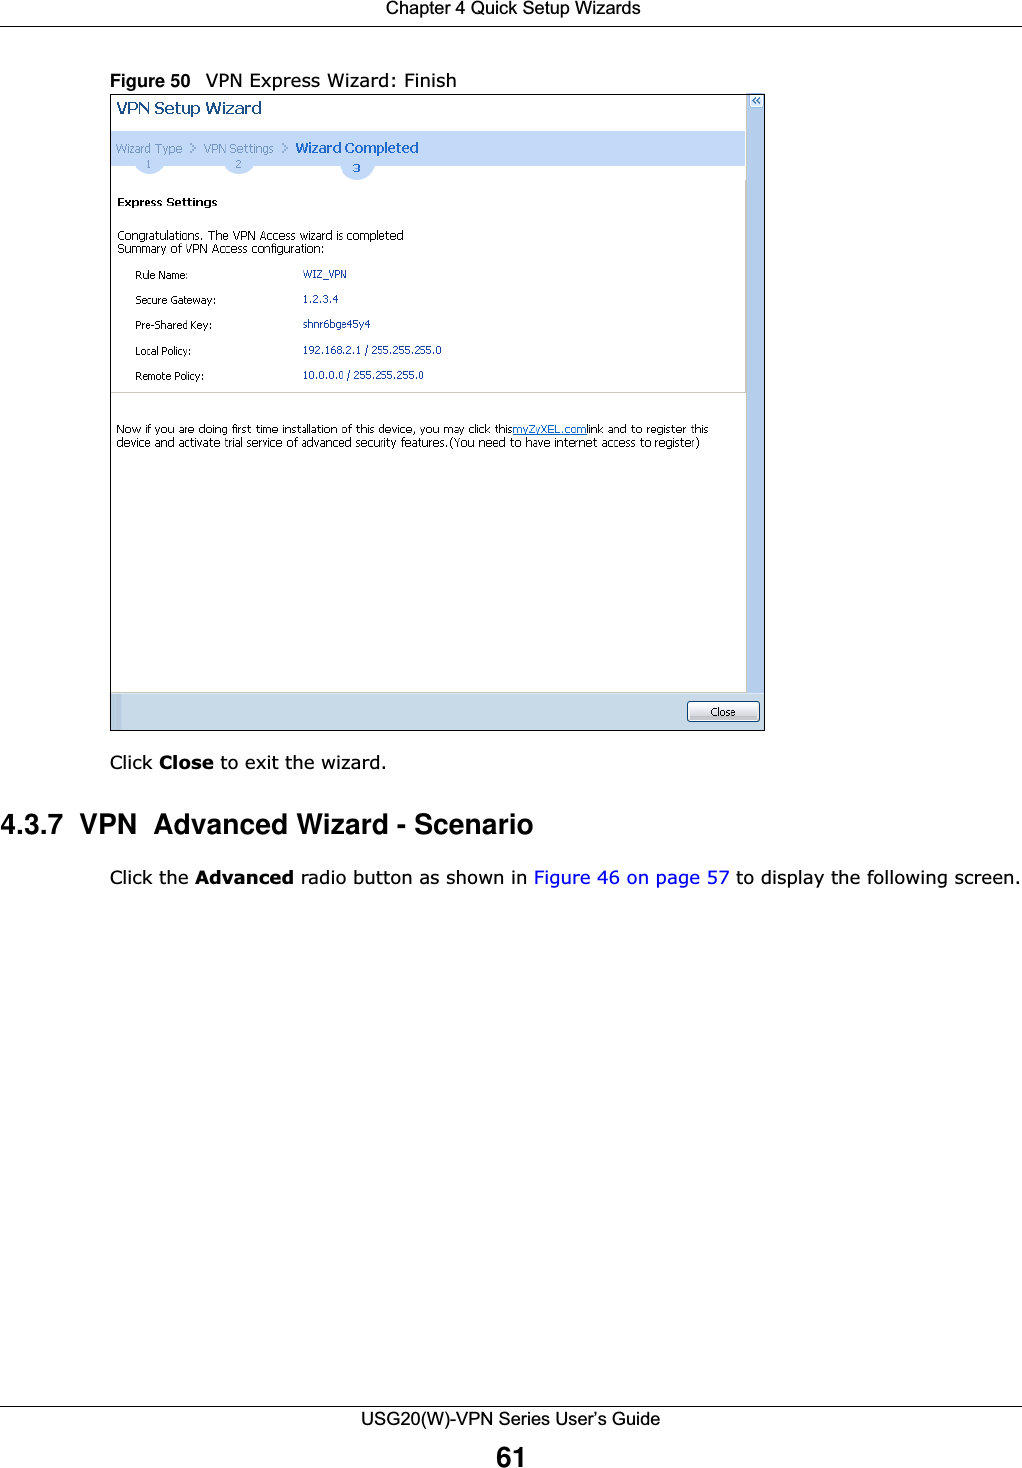  Chapter 4 Quick Setup WizardsUSG20(W)-VPN Series User’s Guide61Figure 50   VPN Express Wizard: Finish Click Close to exit the wizard.4.3.7  VPN  Advanced Wizard - Scenario Click the Advanced radio button as shown in Figure 46 on page 57 to display the following screen.